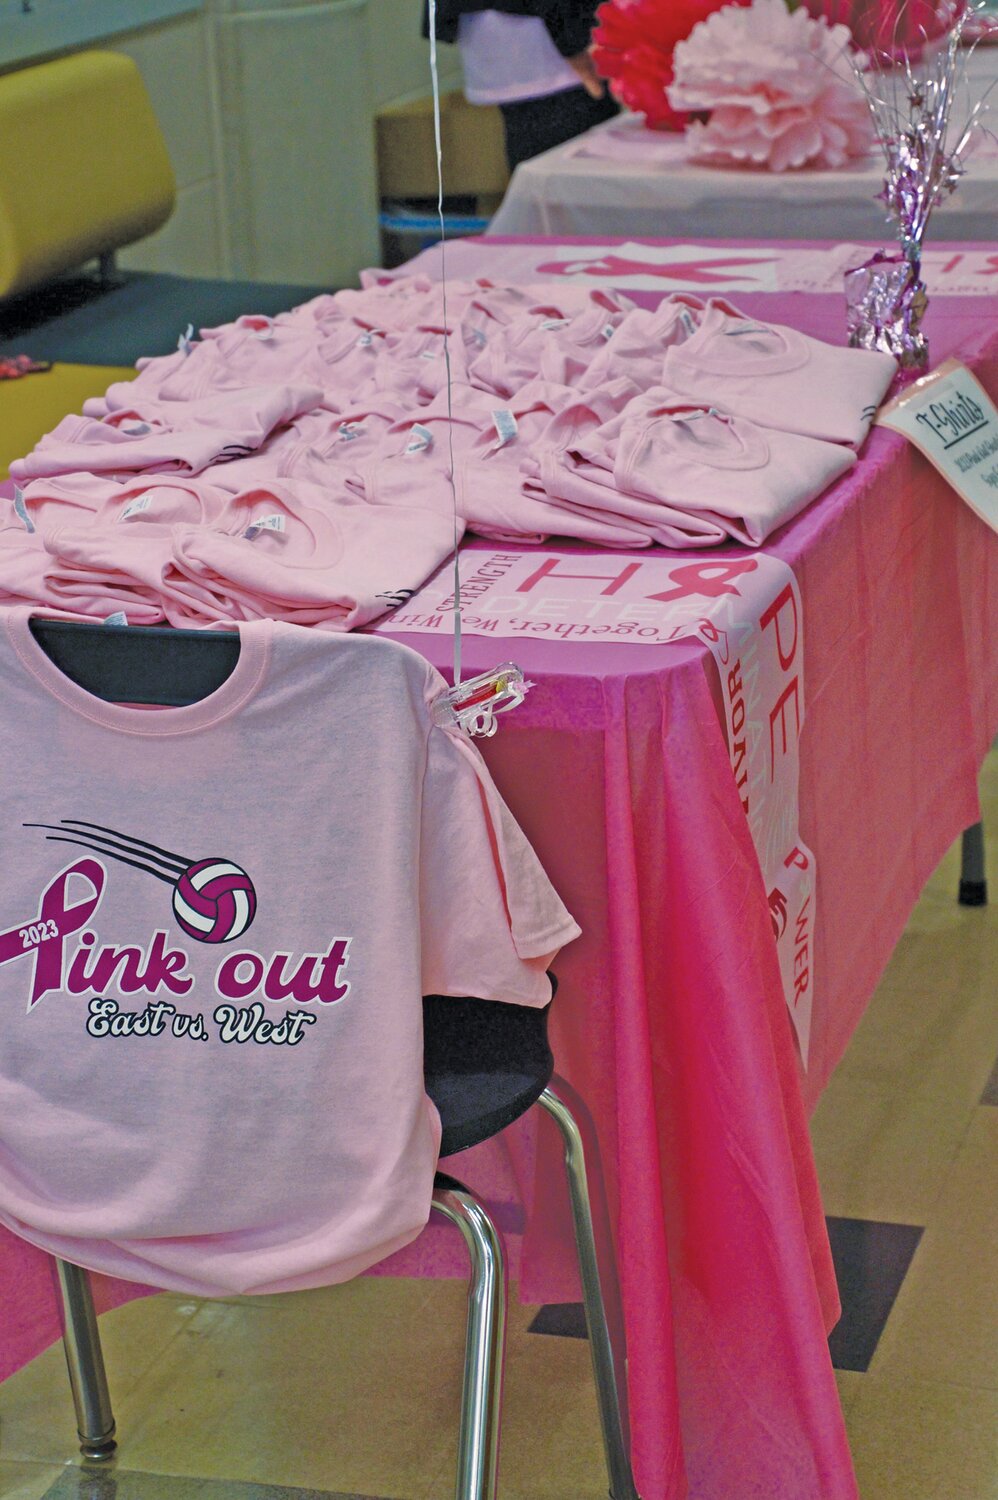 Pink Out T-shirts were sold at the Central Bucks East - West girls volleyball match.